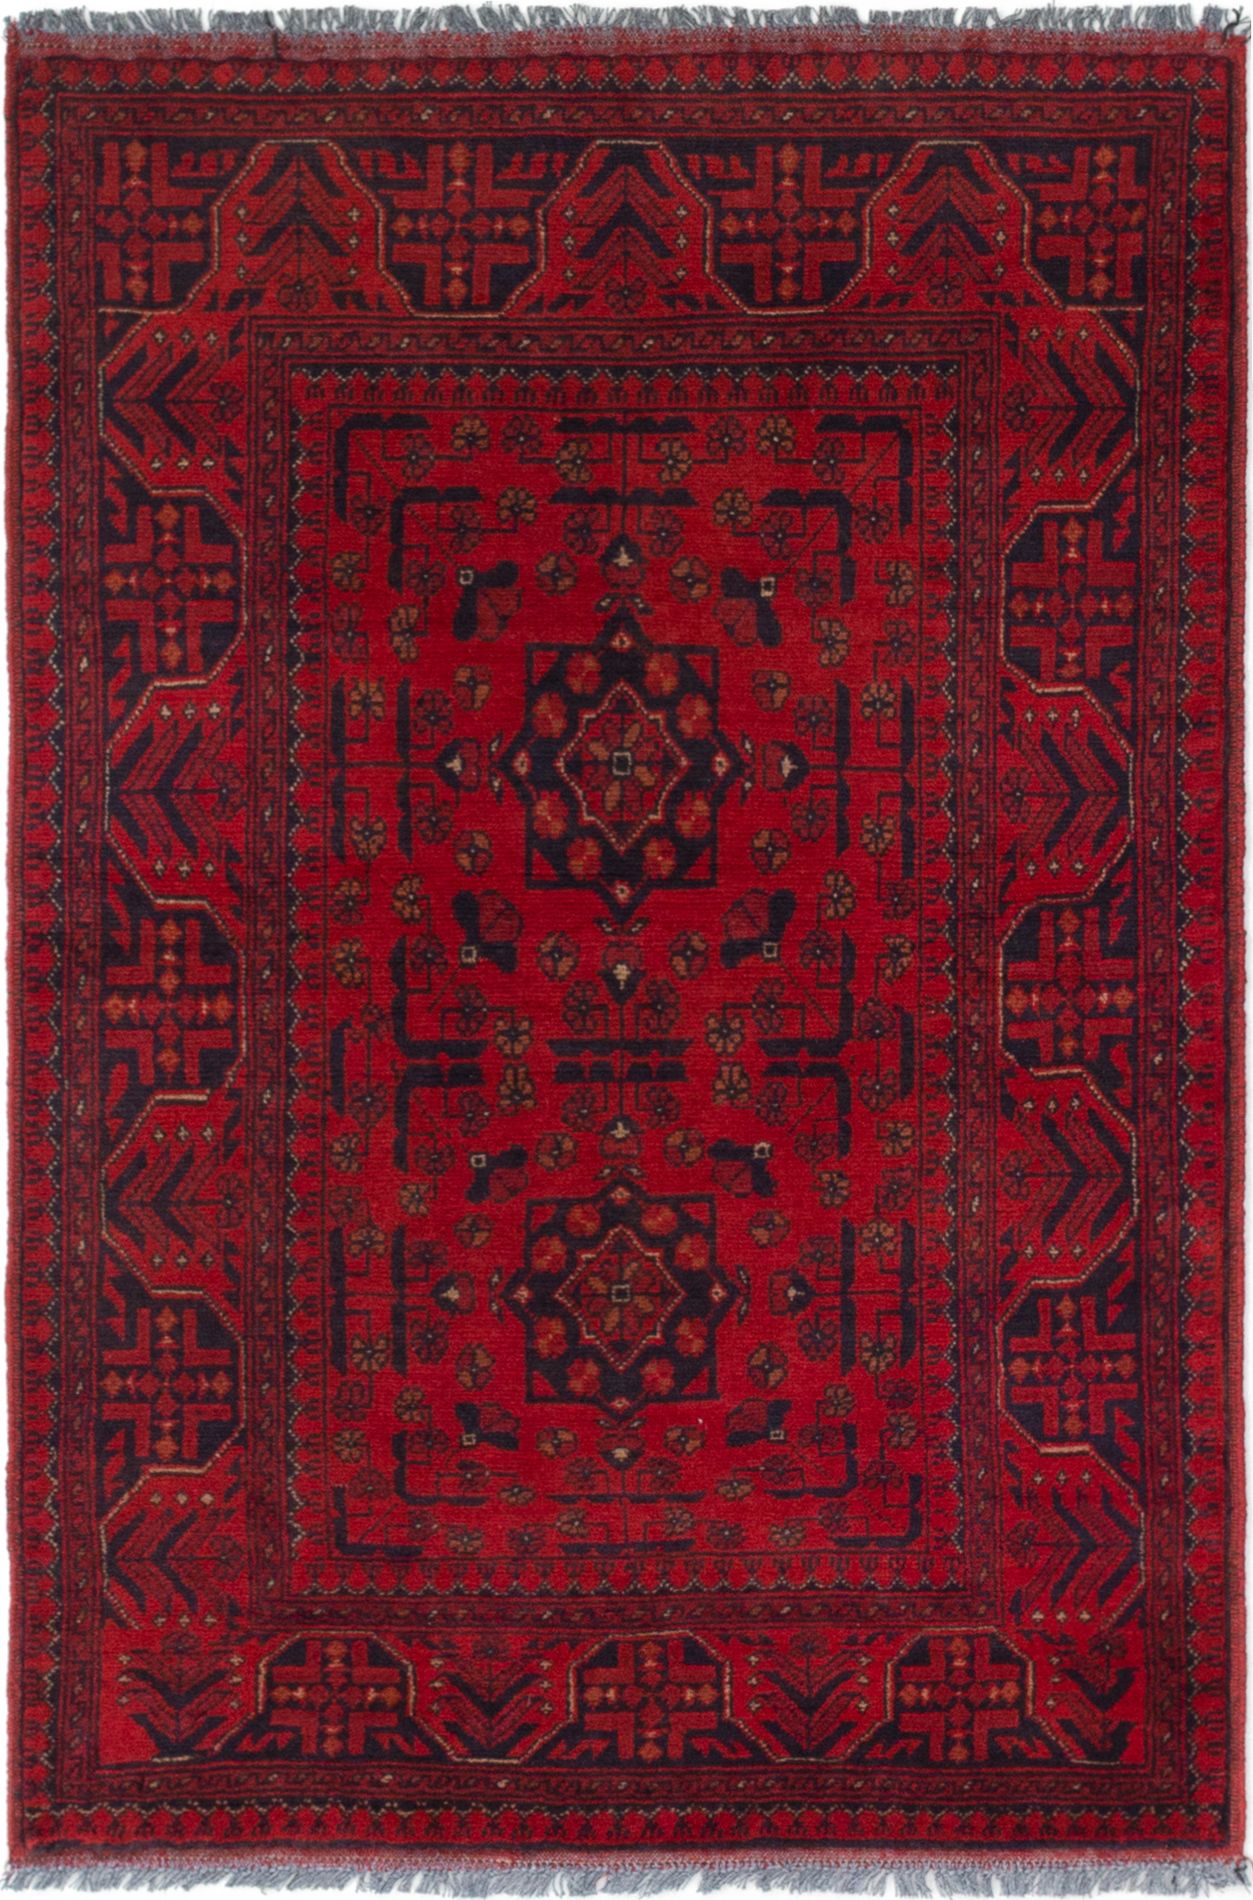 Hand-knotted Finest Khal Mohammadi Red Wool Rug 3'4" x 5'0" (32) Size: 3'4" x 5'0"  